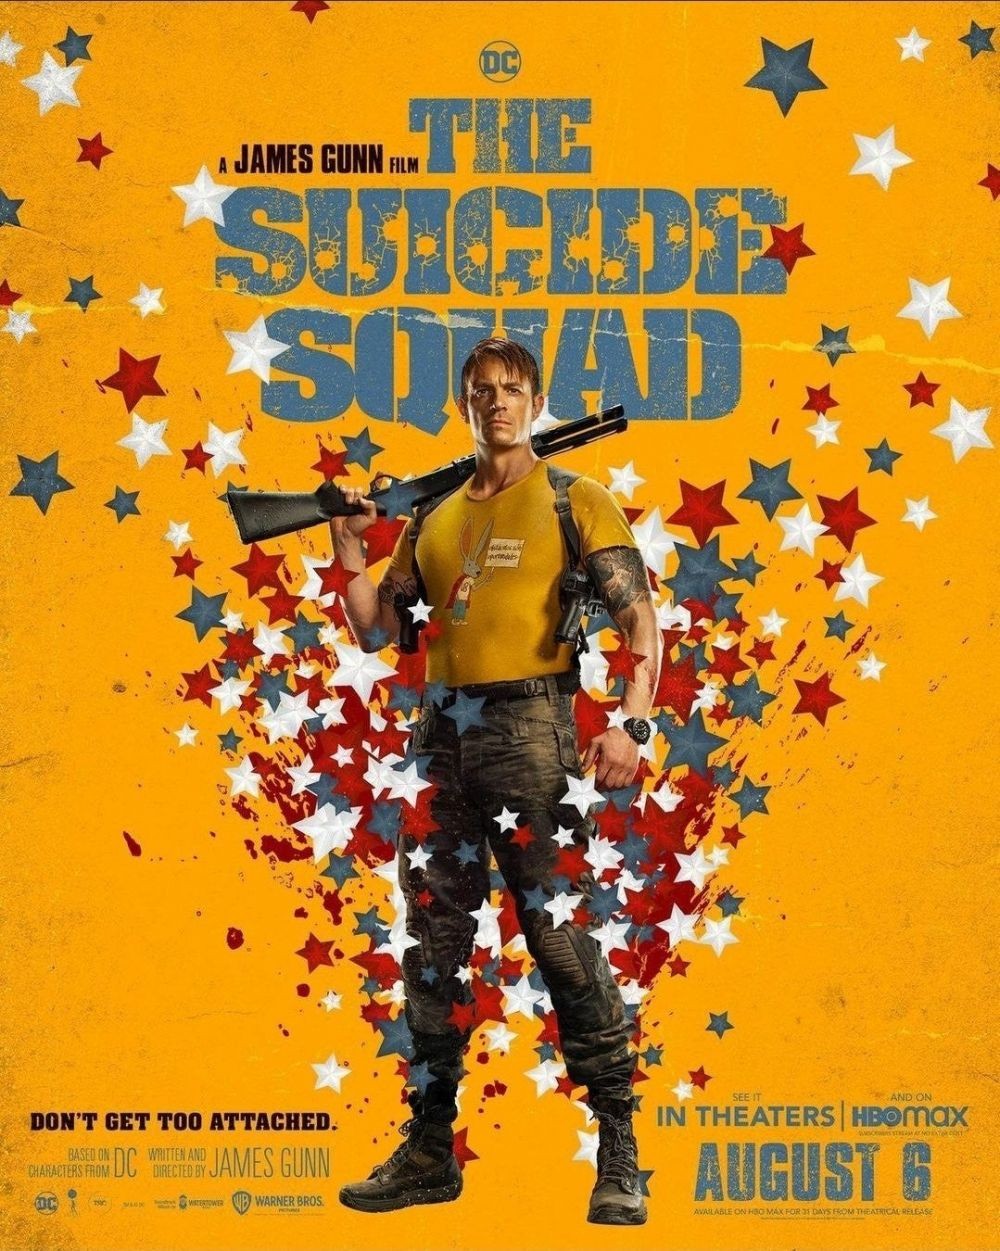 the-suicide-squad-trailer-posters-rick-flag-1262018.jpeg